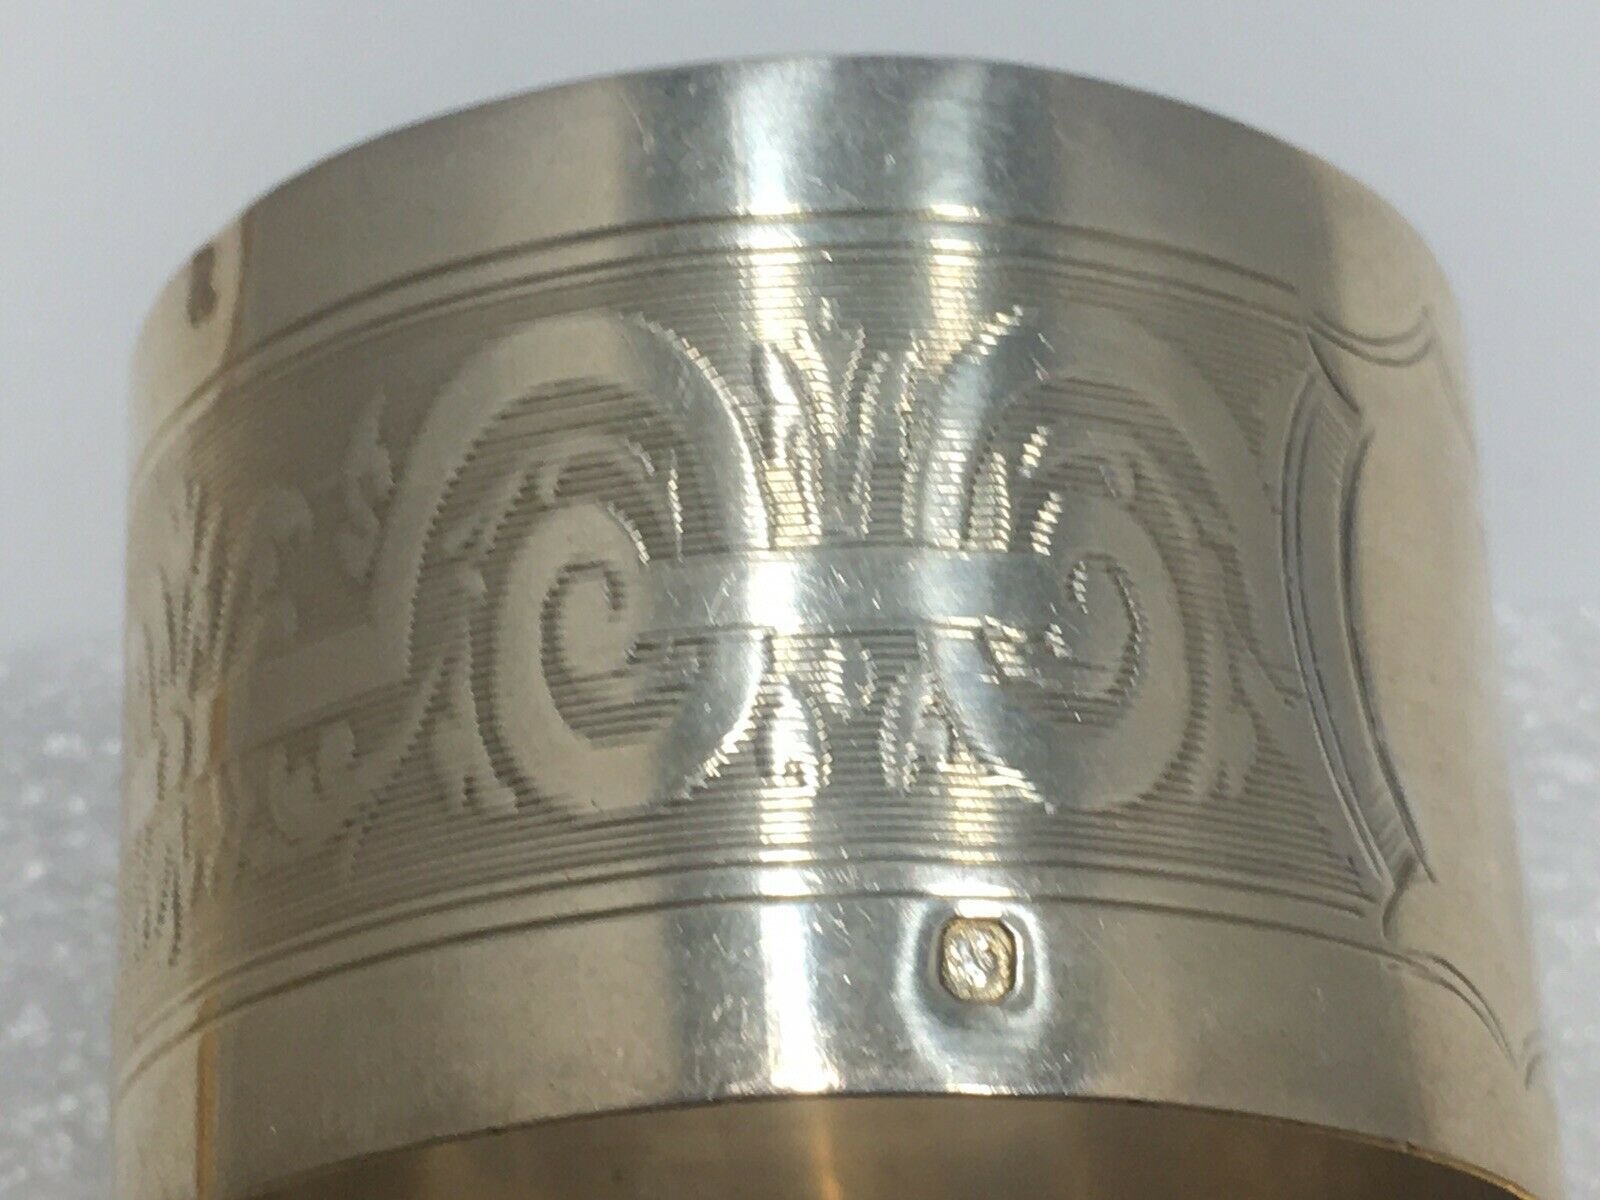 C.1900 Antique French Sterling Silver Napkin Ring Holder Louis XVI 950 No Initia